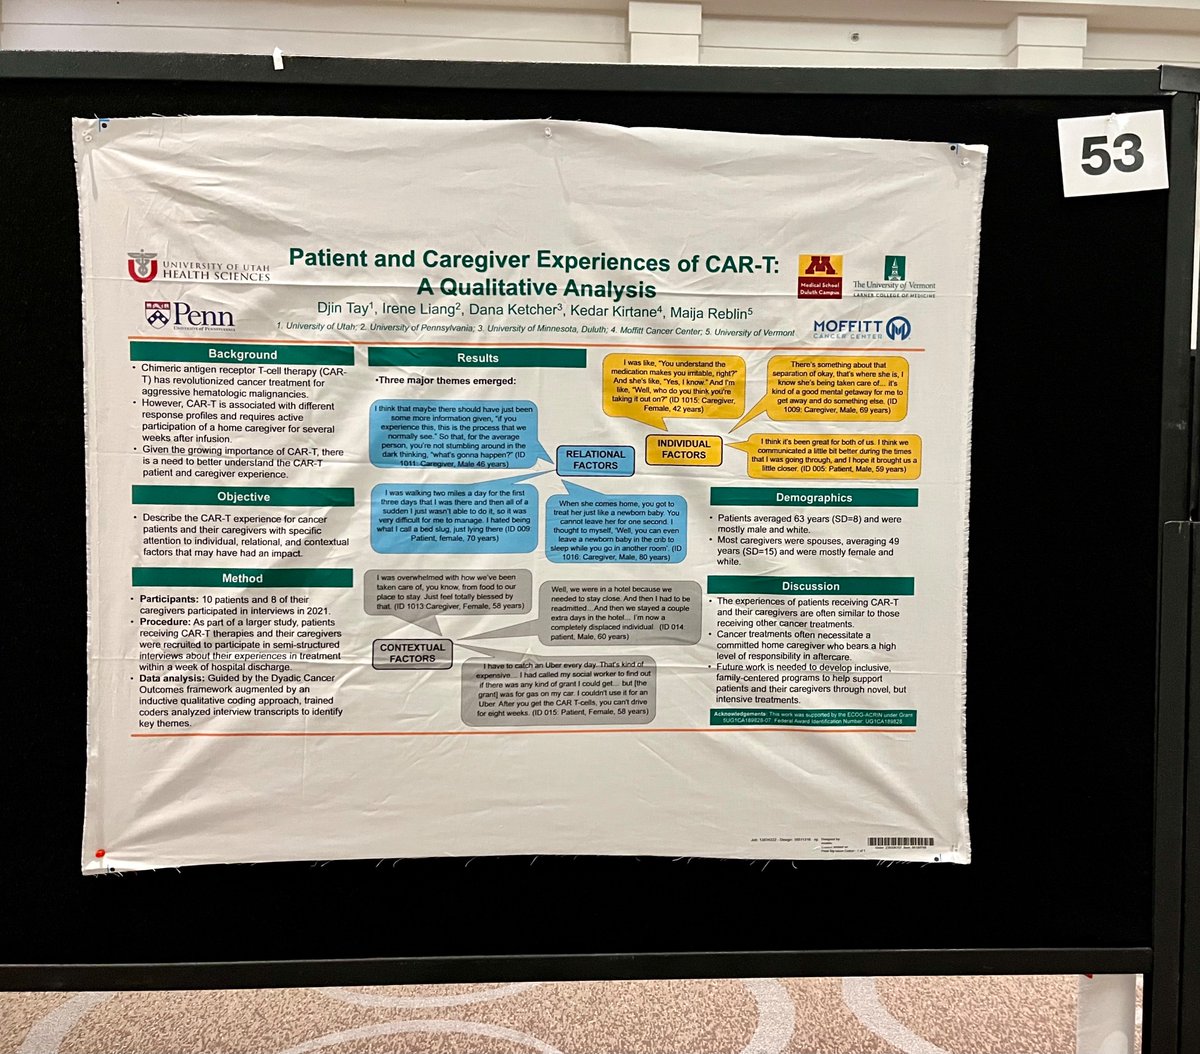 Patient and caregiver experiences of CAR-T this afternoon at #apos2024 @APOSHQ posters! @DjinLL @DrKedarKirtane @PhDanaK @eaonc funded @UVMcancercenter @utnurseresearch @MoffittResearch